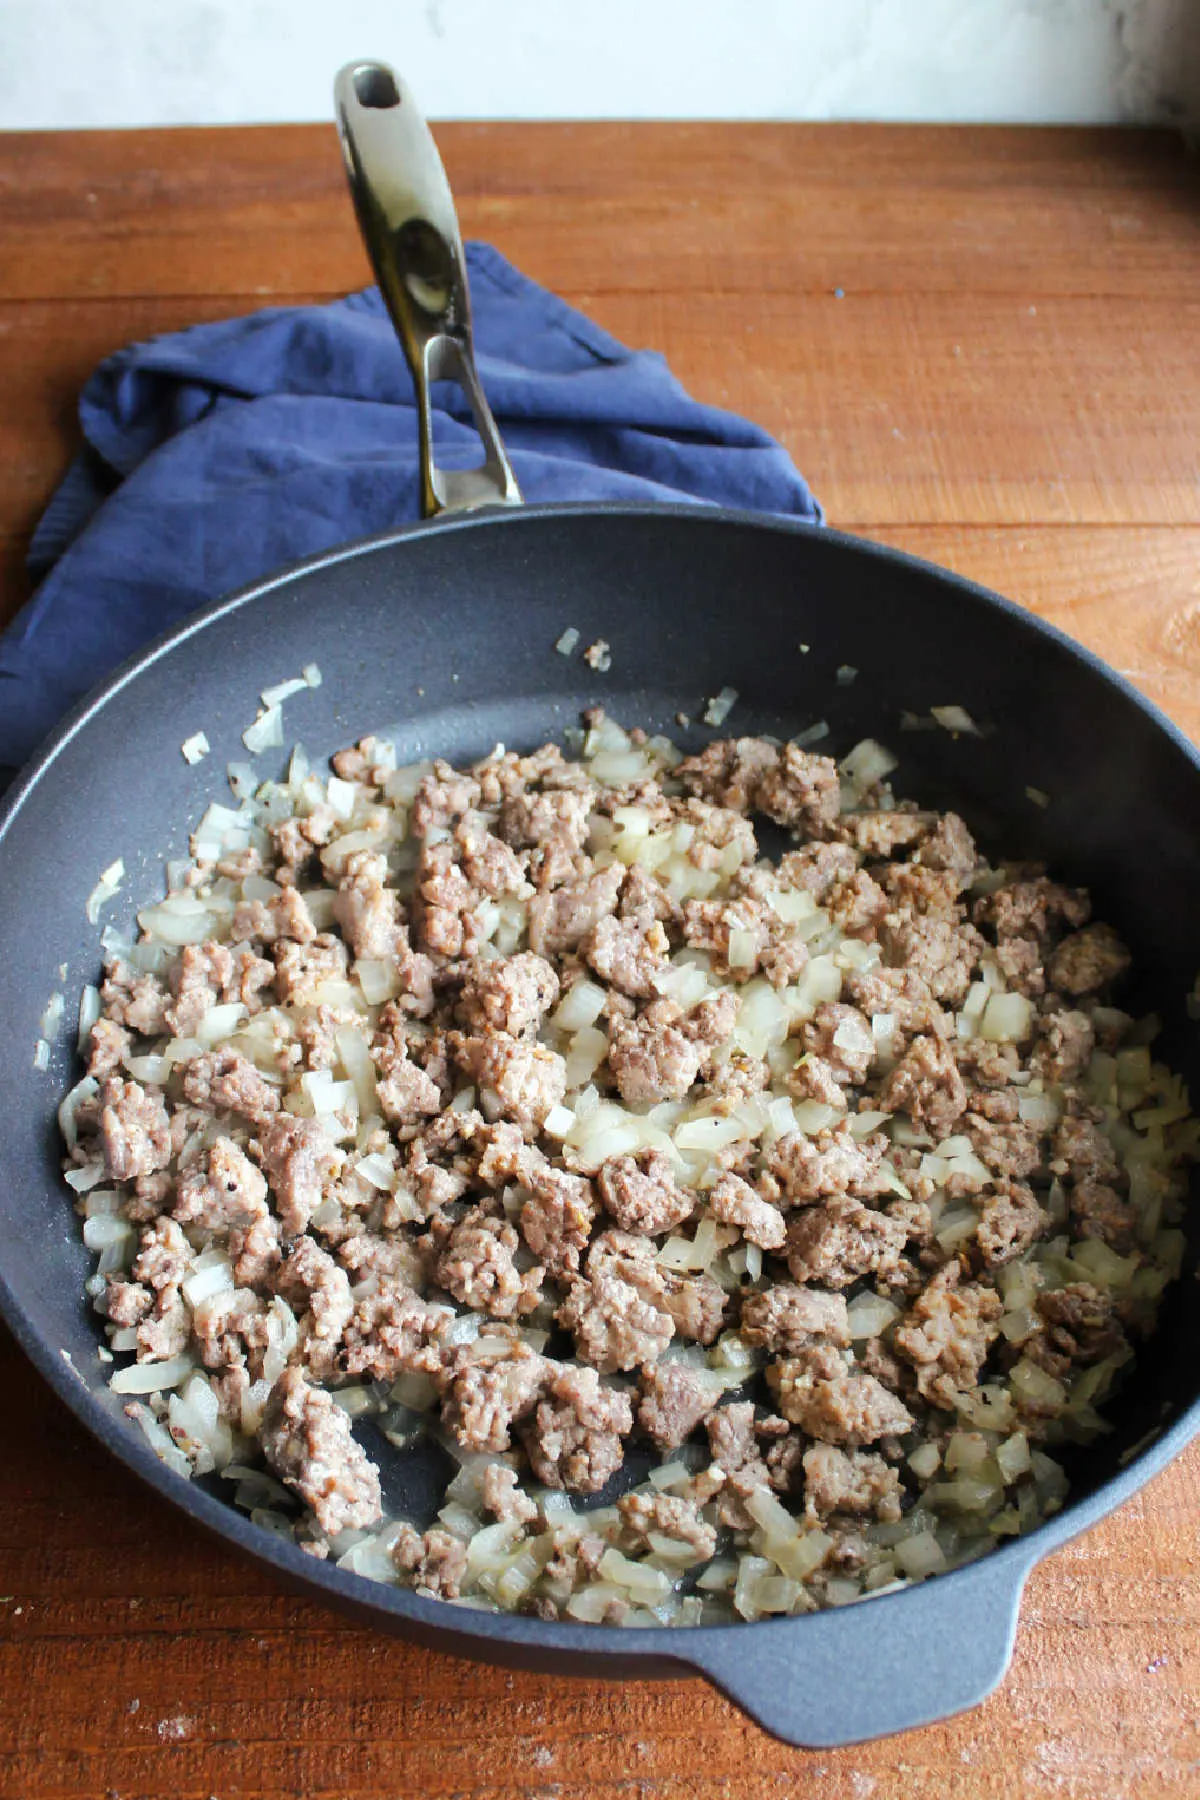 Large saute pan filled with browned sausage and translucent chopped onions, ready for the greens.